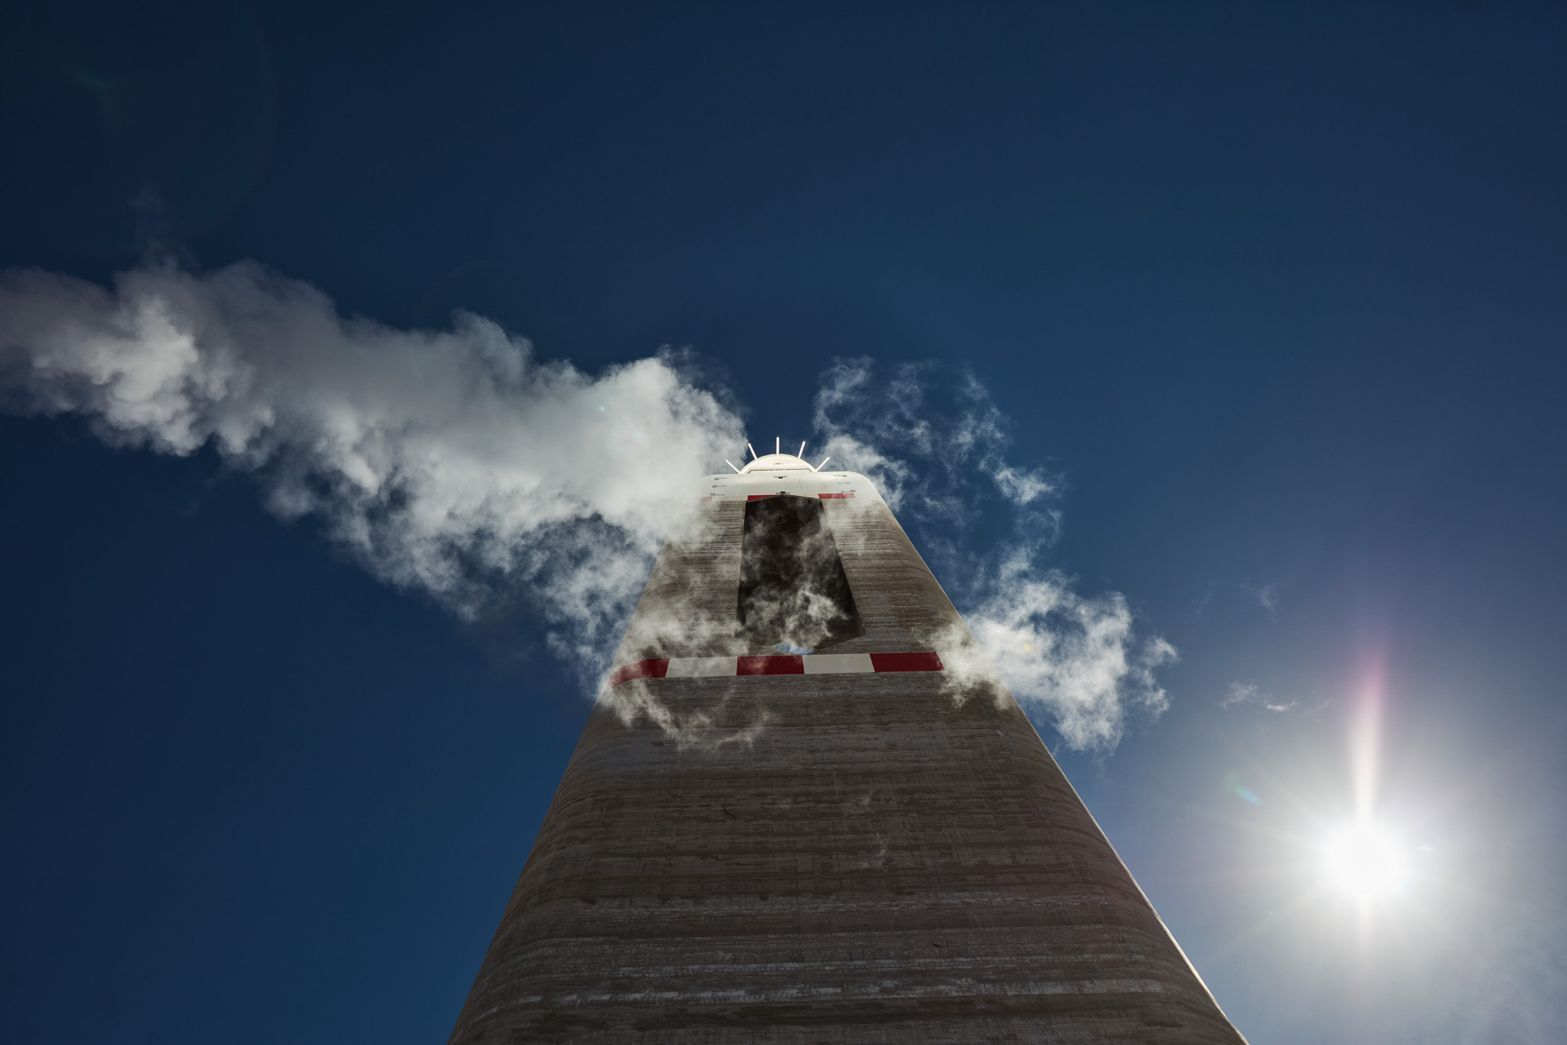 Solar thermal energy with storage like Cerro Dominador Tower CSP in Chile will be more competitive in the first auction to incentivize dispatchable renewables like CSP